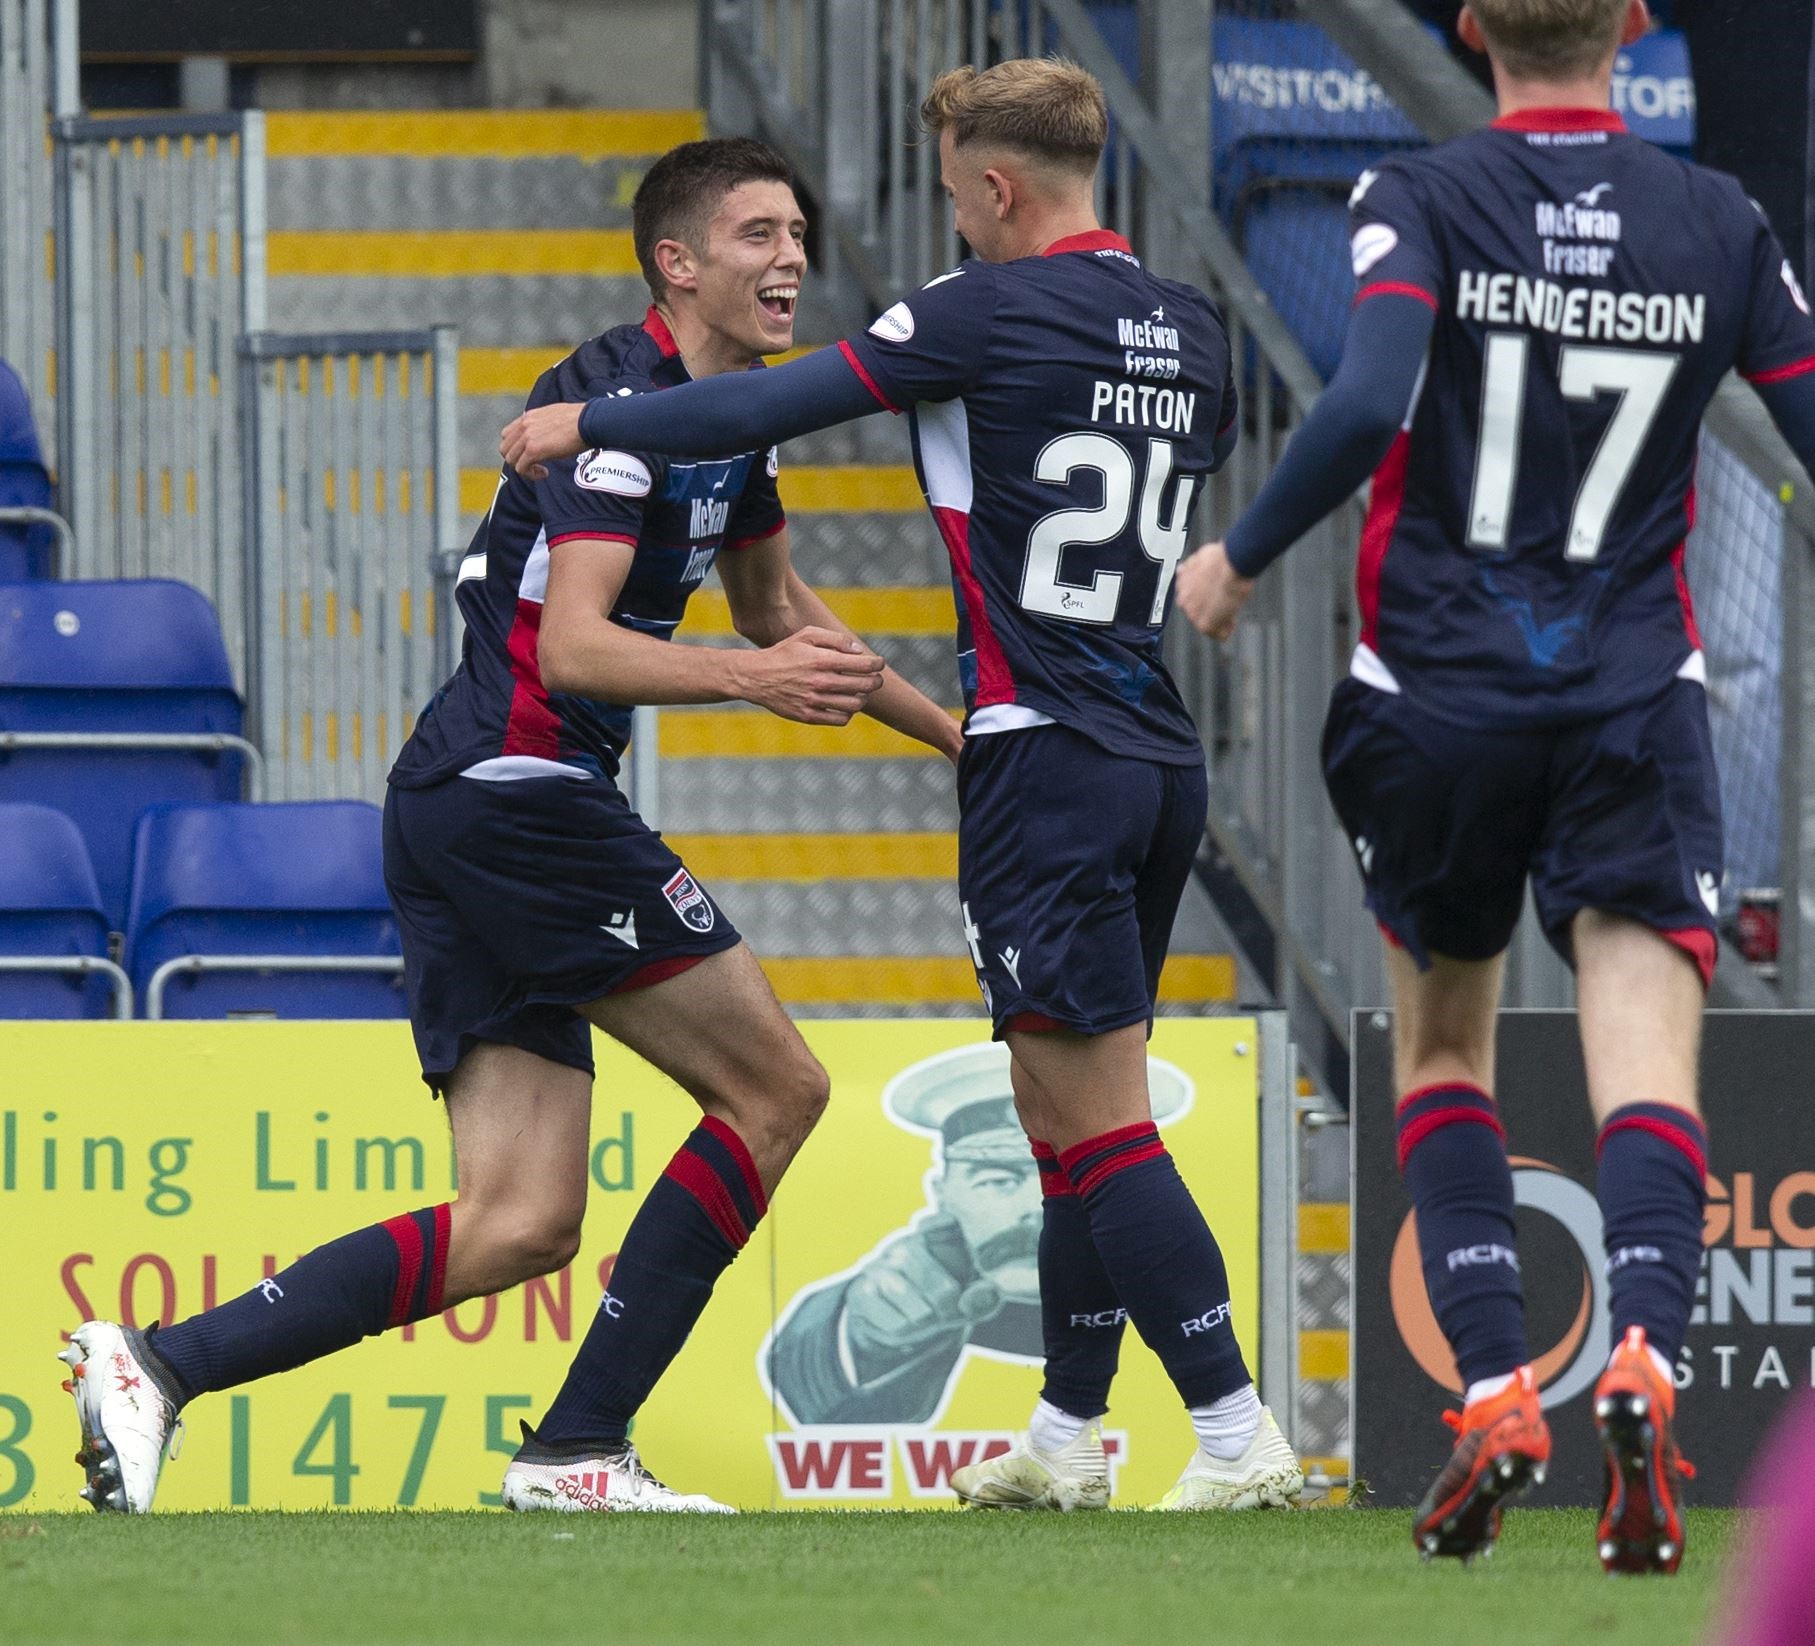 Picture - Ken Macpherson, Inverness. Ross County(2) v St. Mirren(1). 14.09.19. Ross County's Ross Stewart celebrates after scoring the opening goal.